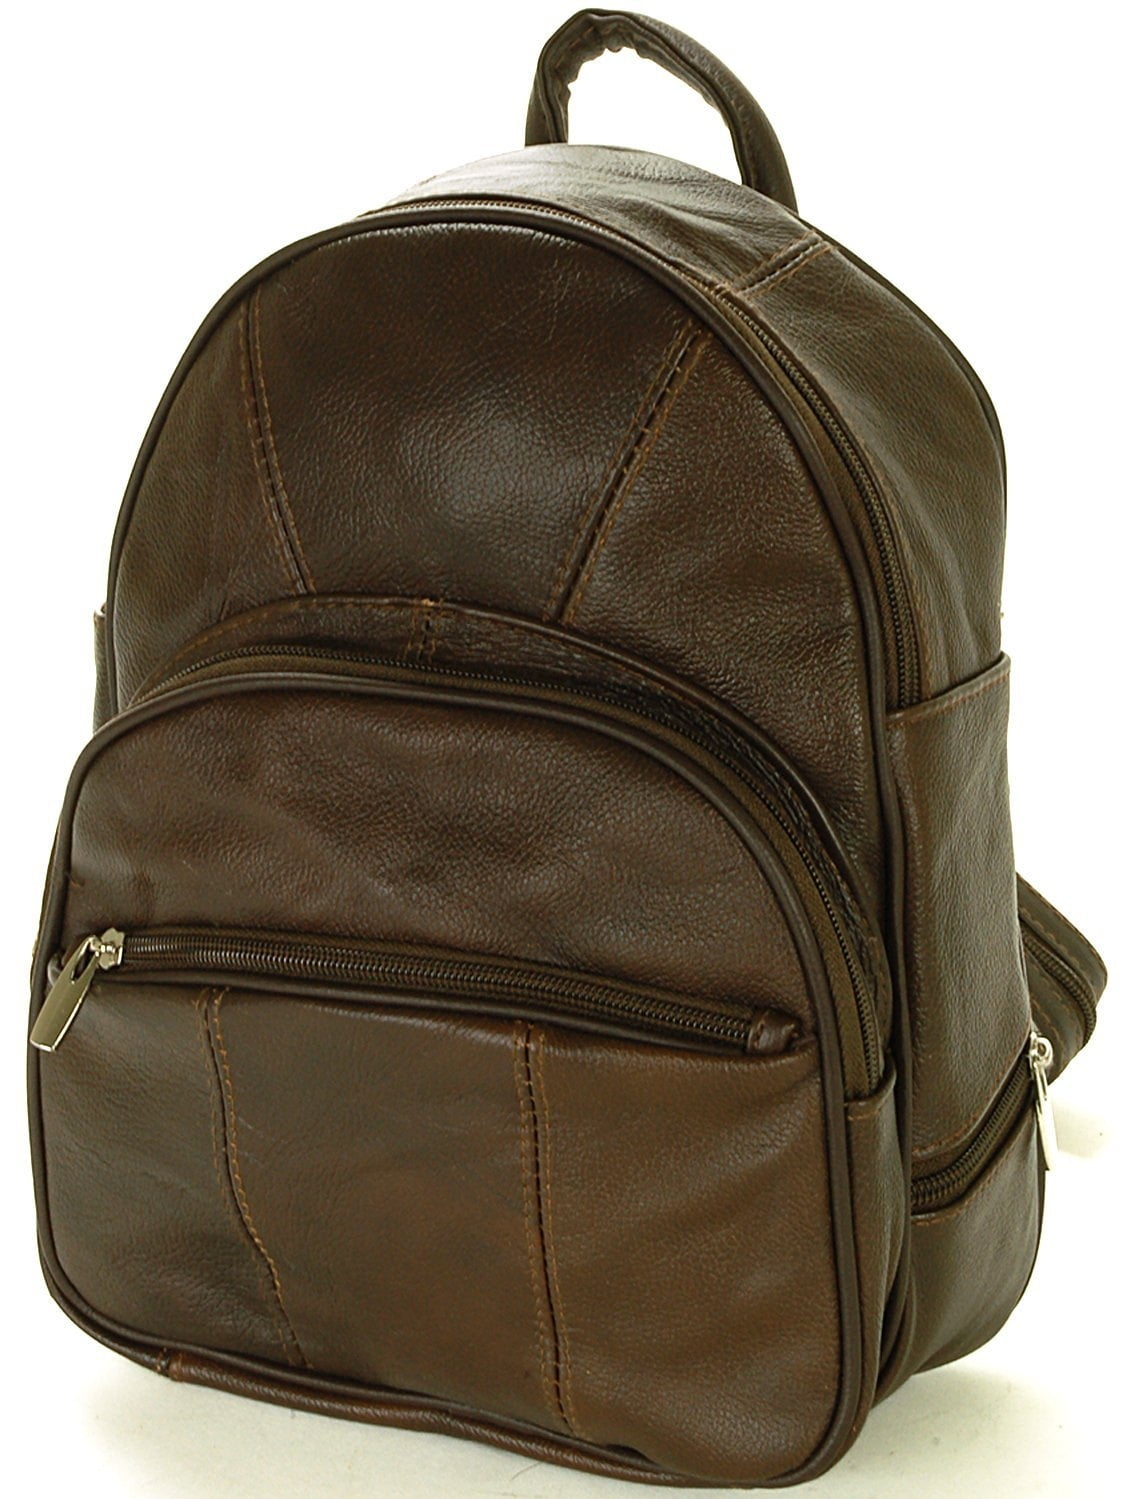 Value on Style - Leather Backpack Purse Mid Size & Convertible into single strap sling Bag or ...